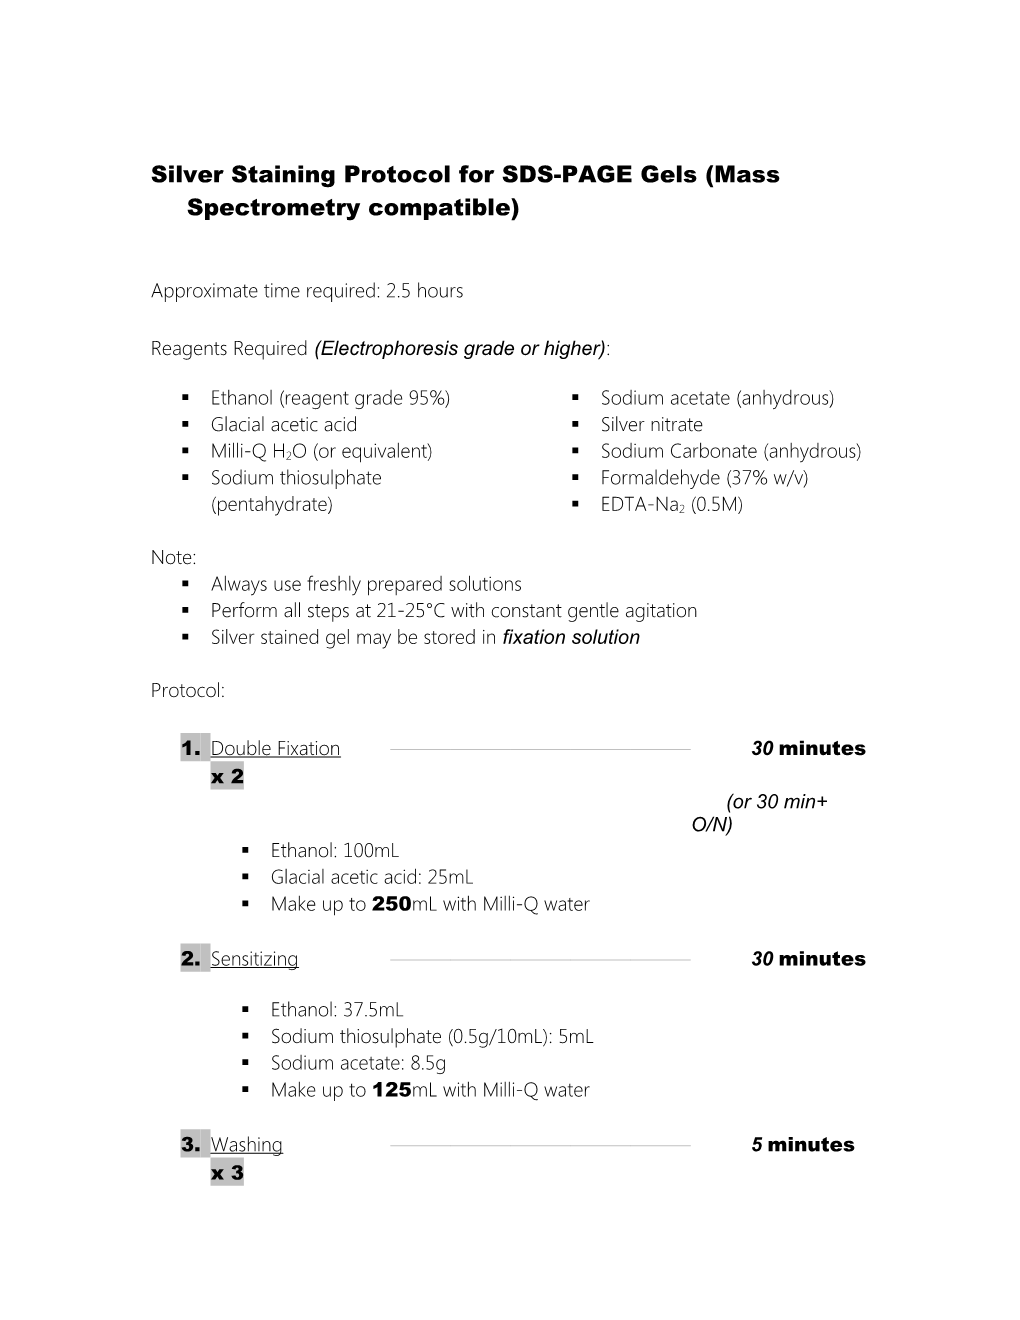 Mass Spectrometry Silver Staining Protocol for SDS-PAGE Gels